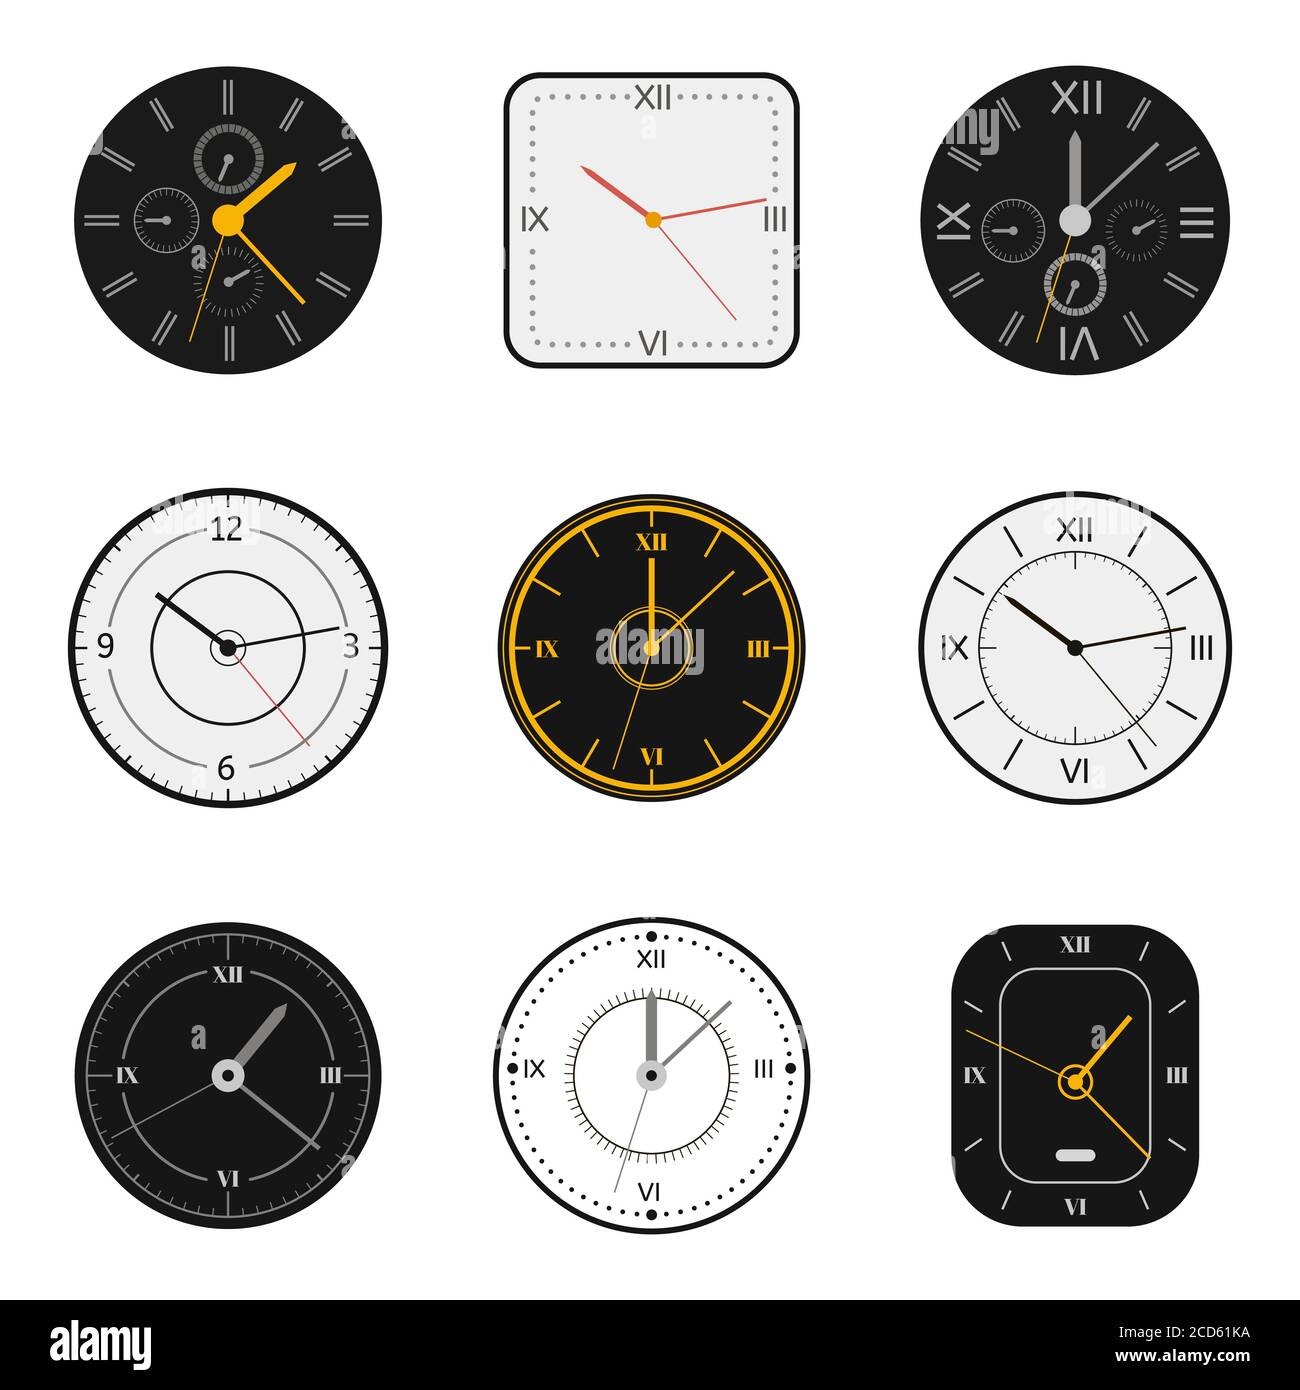 Modern watch face. Clock round scale faces, modern 12 hours round clock, time measurement watch vector illustration symbols set Stock Vector